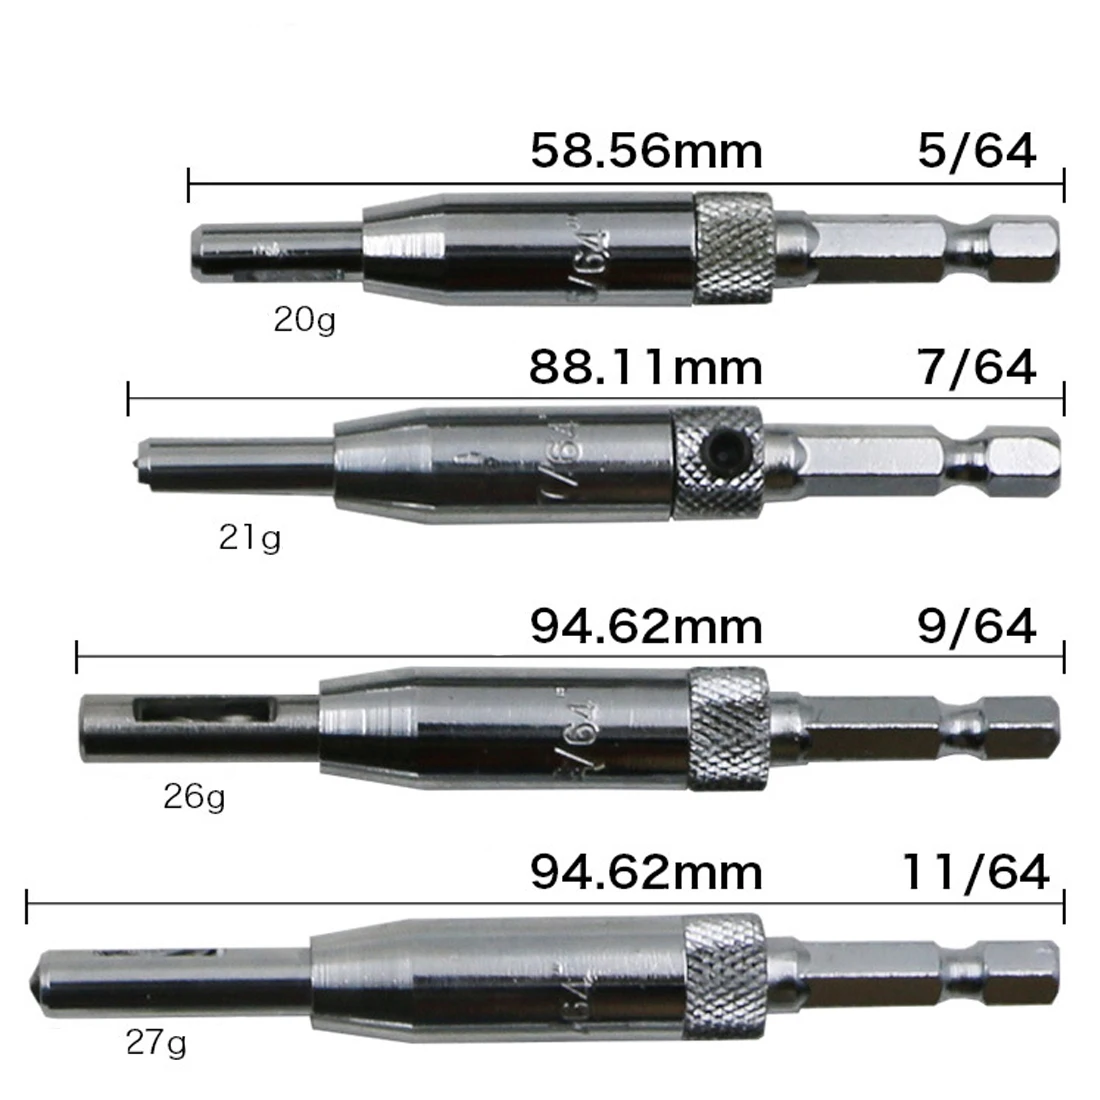 
4PC HSS Woodworking Hex Shank Self Centering Hinge Drill Bits for Door Cabinet 